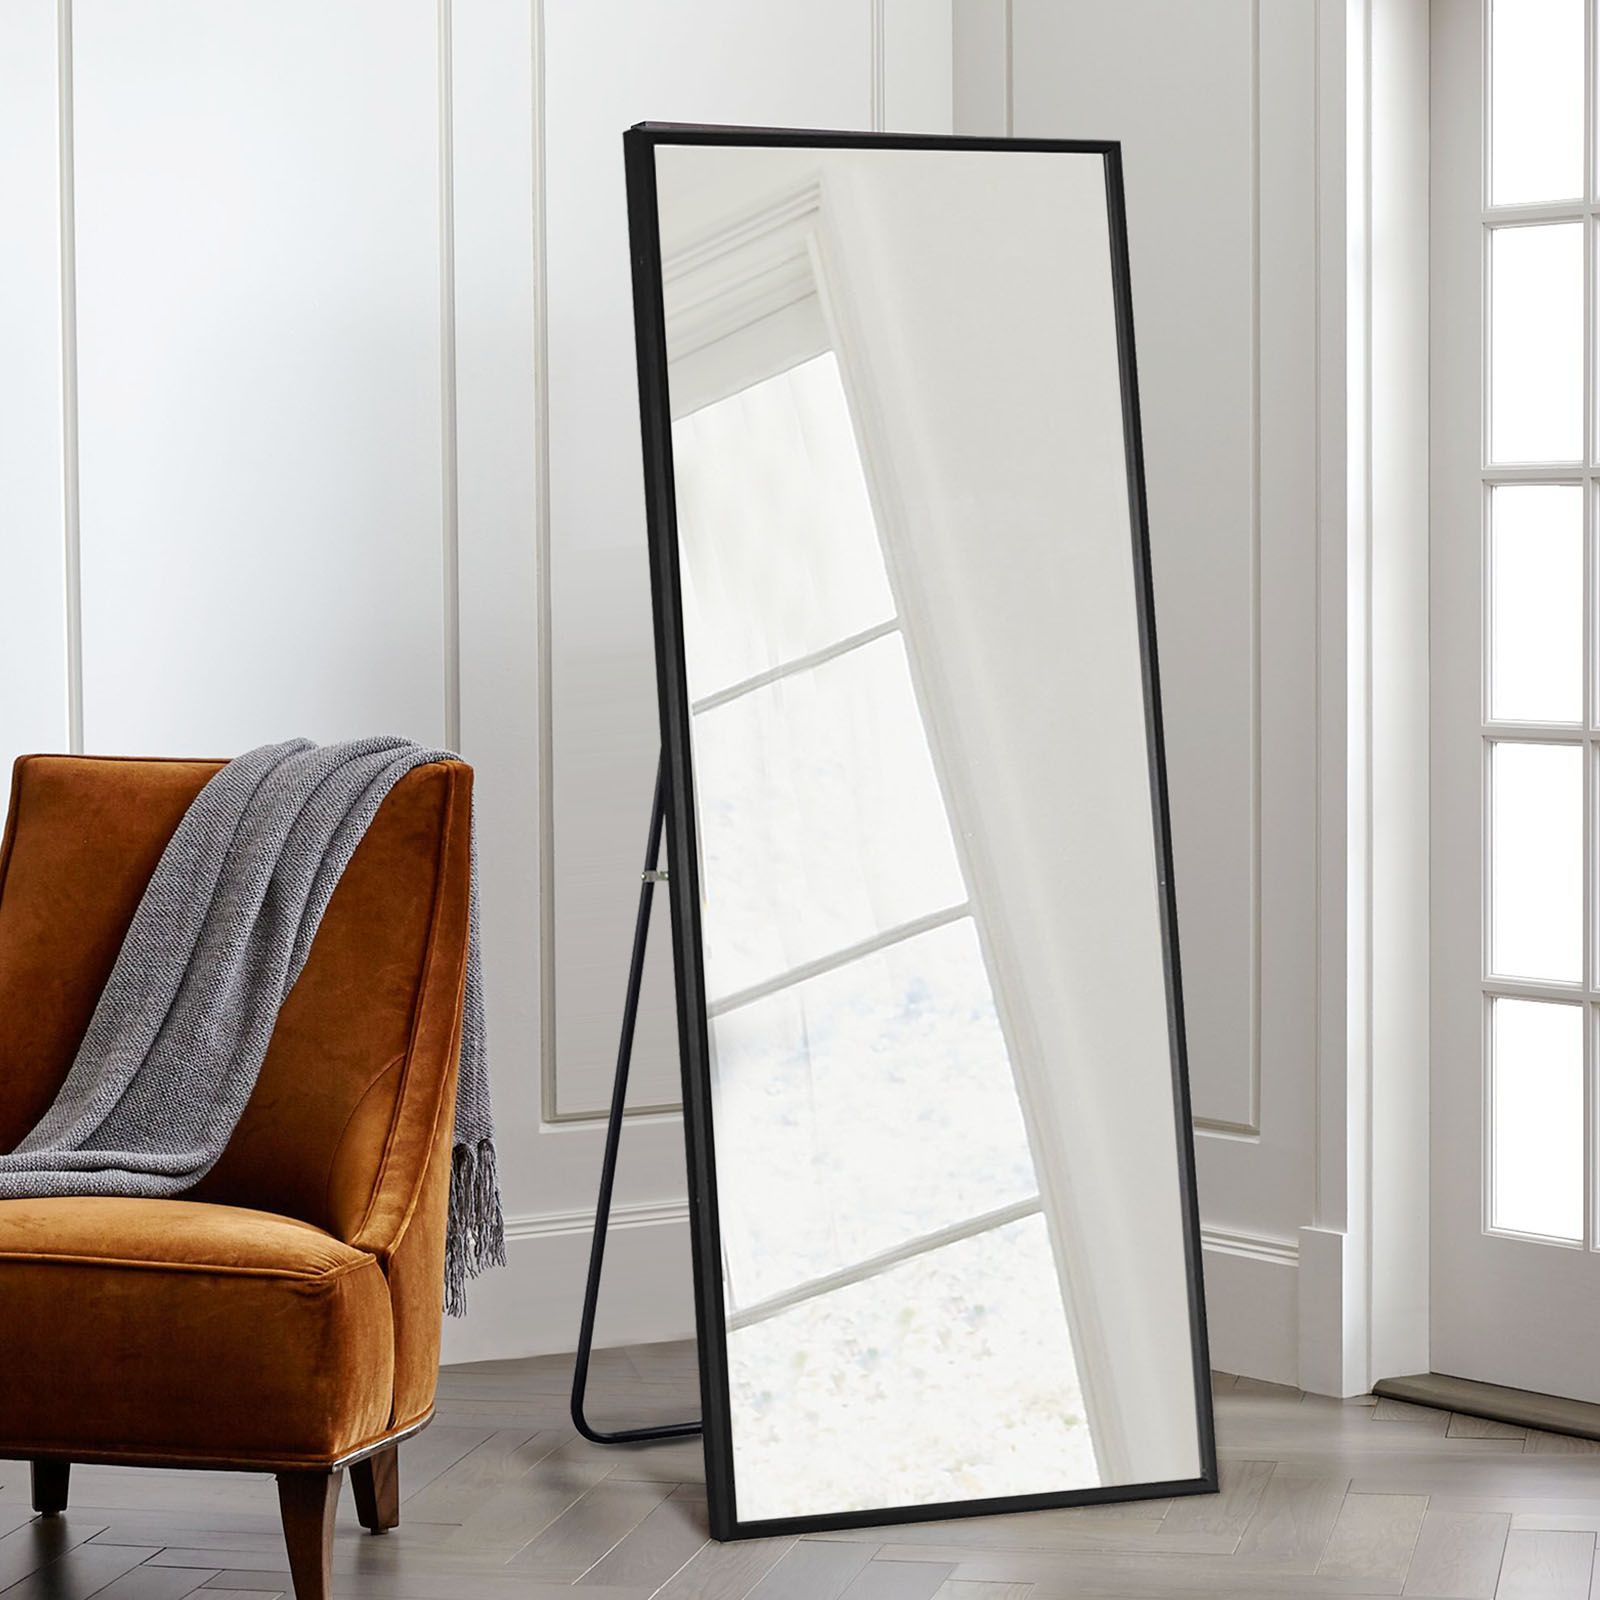 Neutype Full Length Mirror Floor Mirror With Stand Large Wall Mounted Pertaining To Square Oversized Wall Mirrors (View 3 of 15)